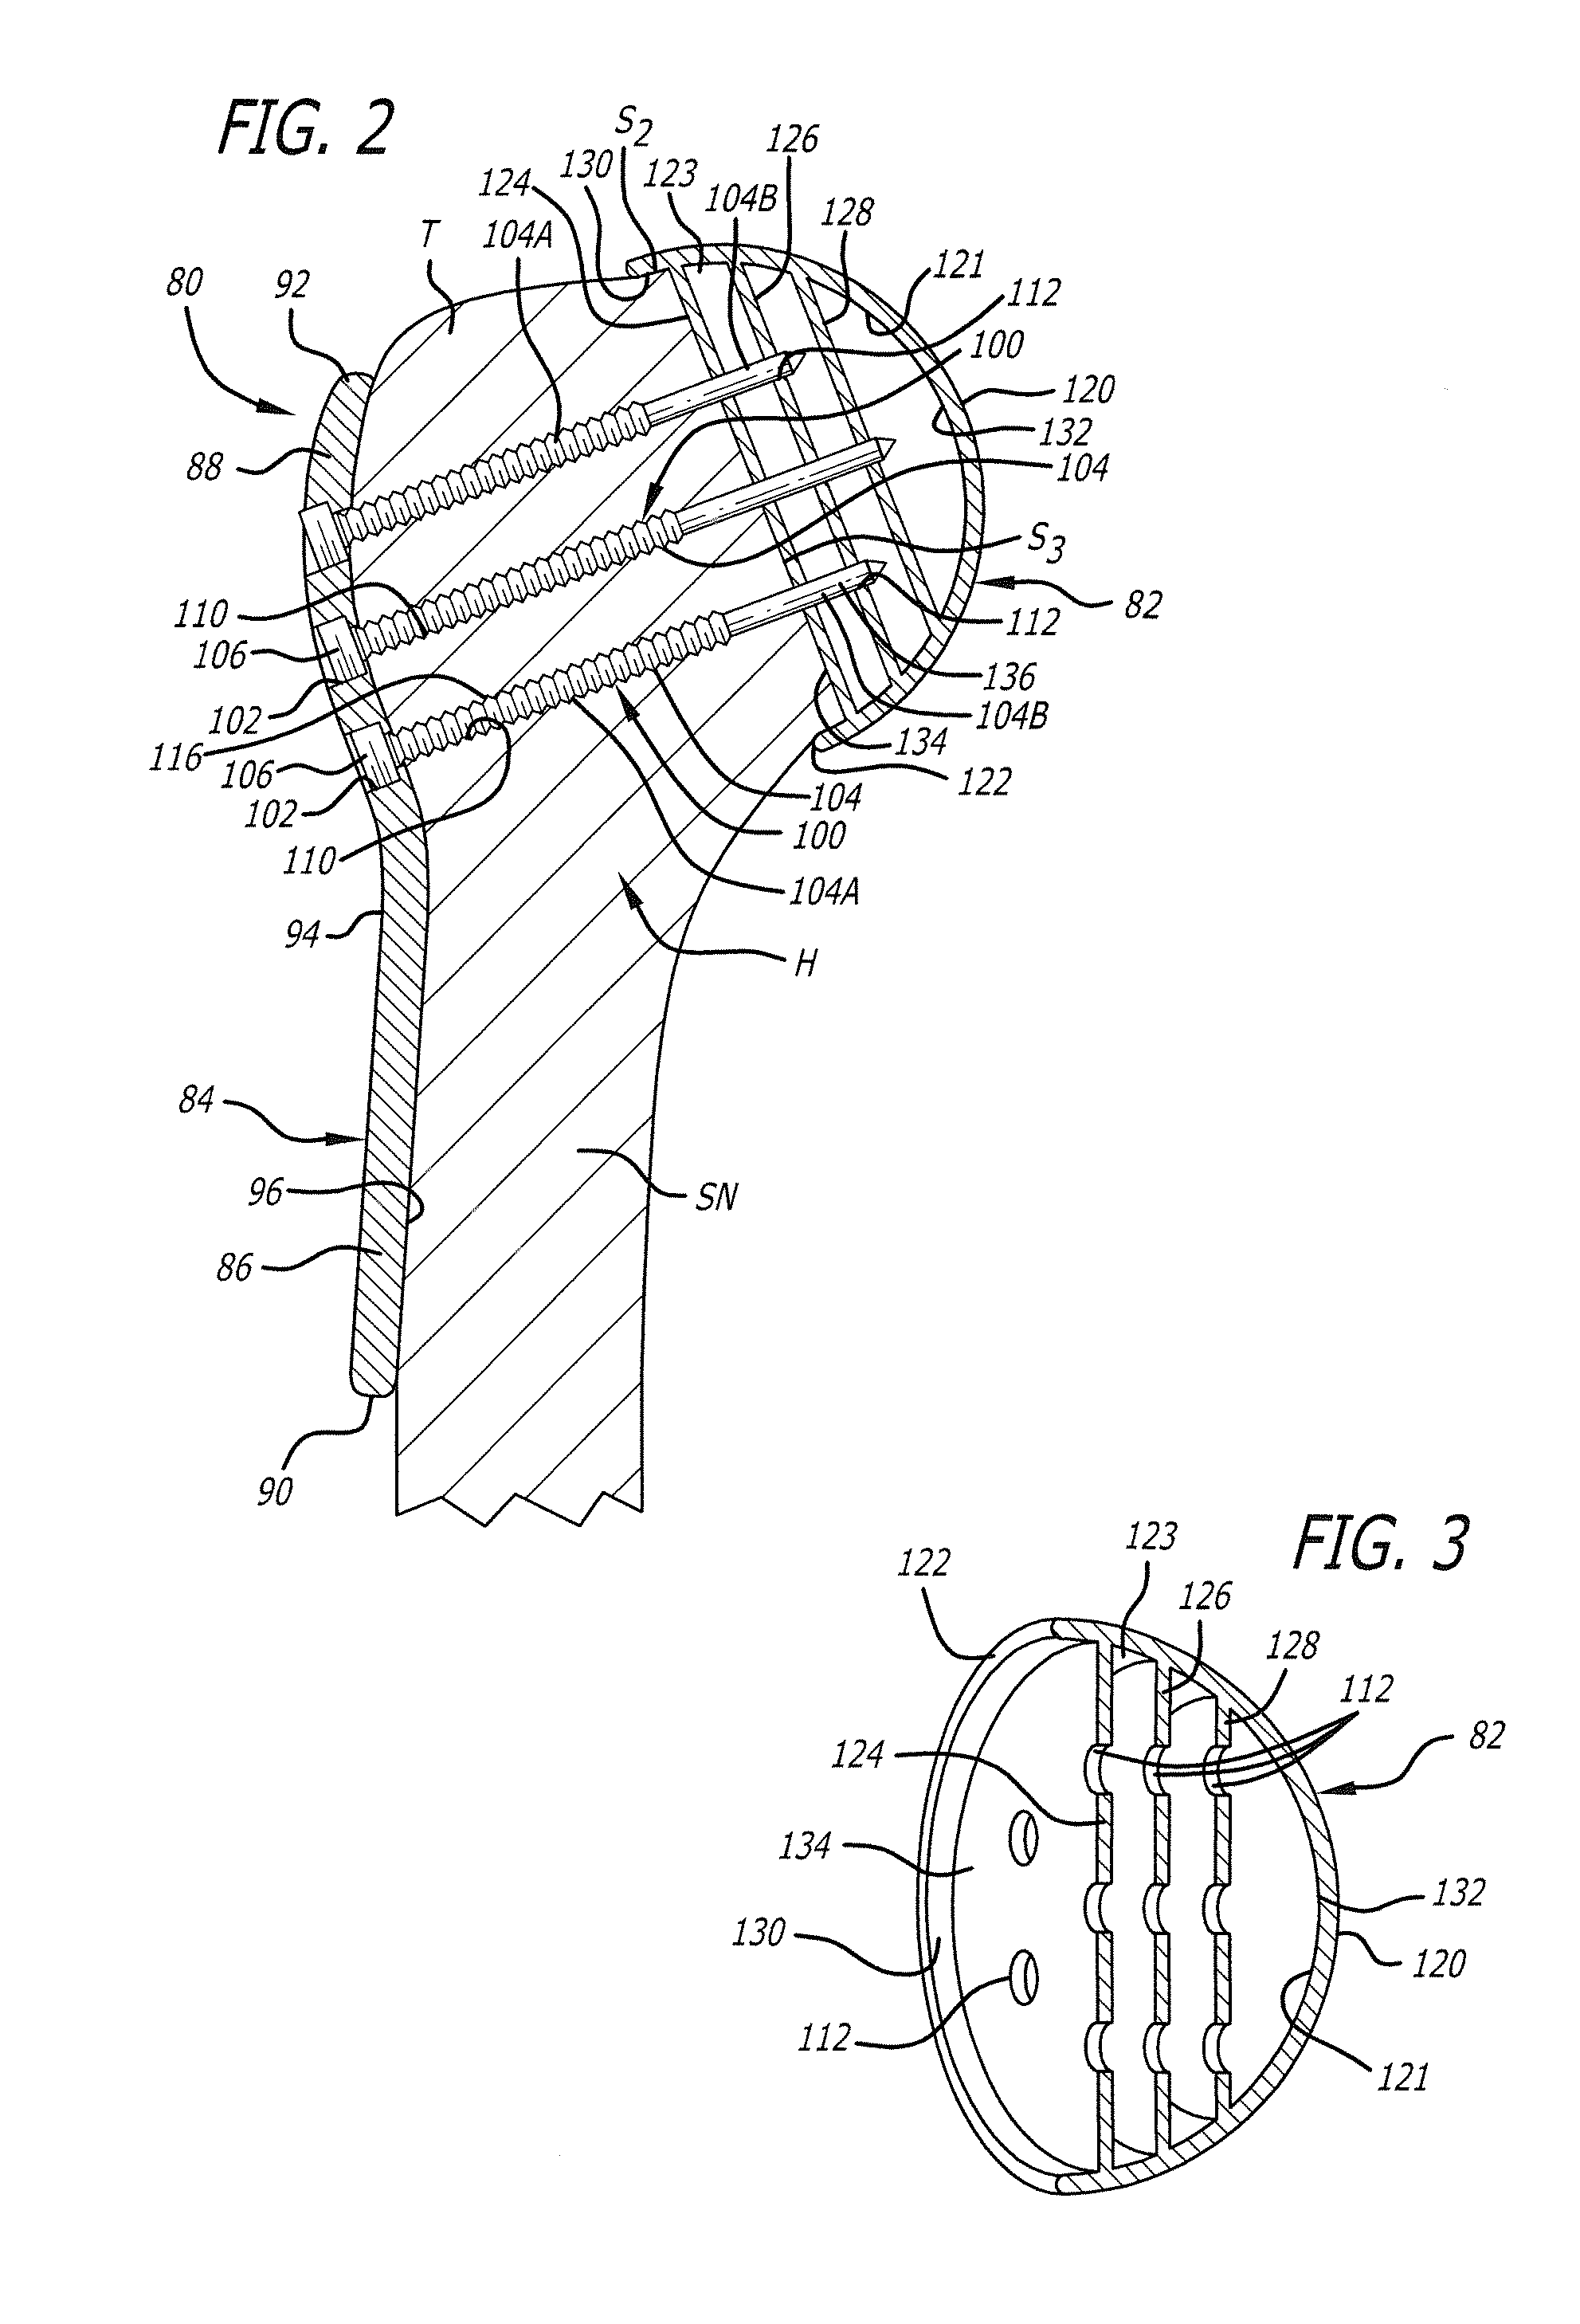 System and method for fracture replacement of comminuted bone fractures or portions thereof adjacent bone joints